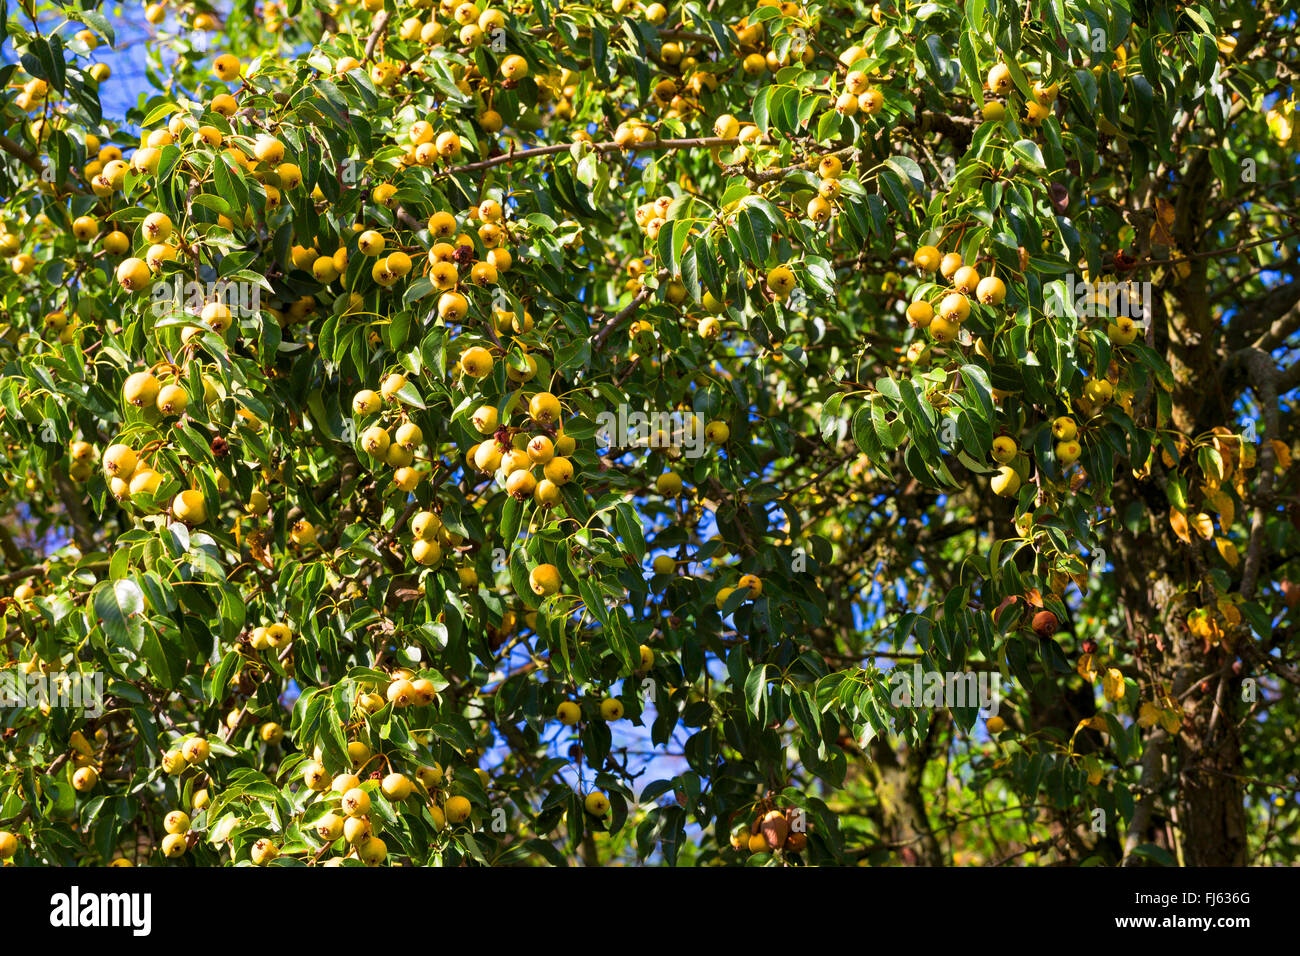 European Wild Pear, Wild Pear (Pyrus pyraster), branch with fruits, Germany Stock Photo